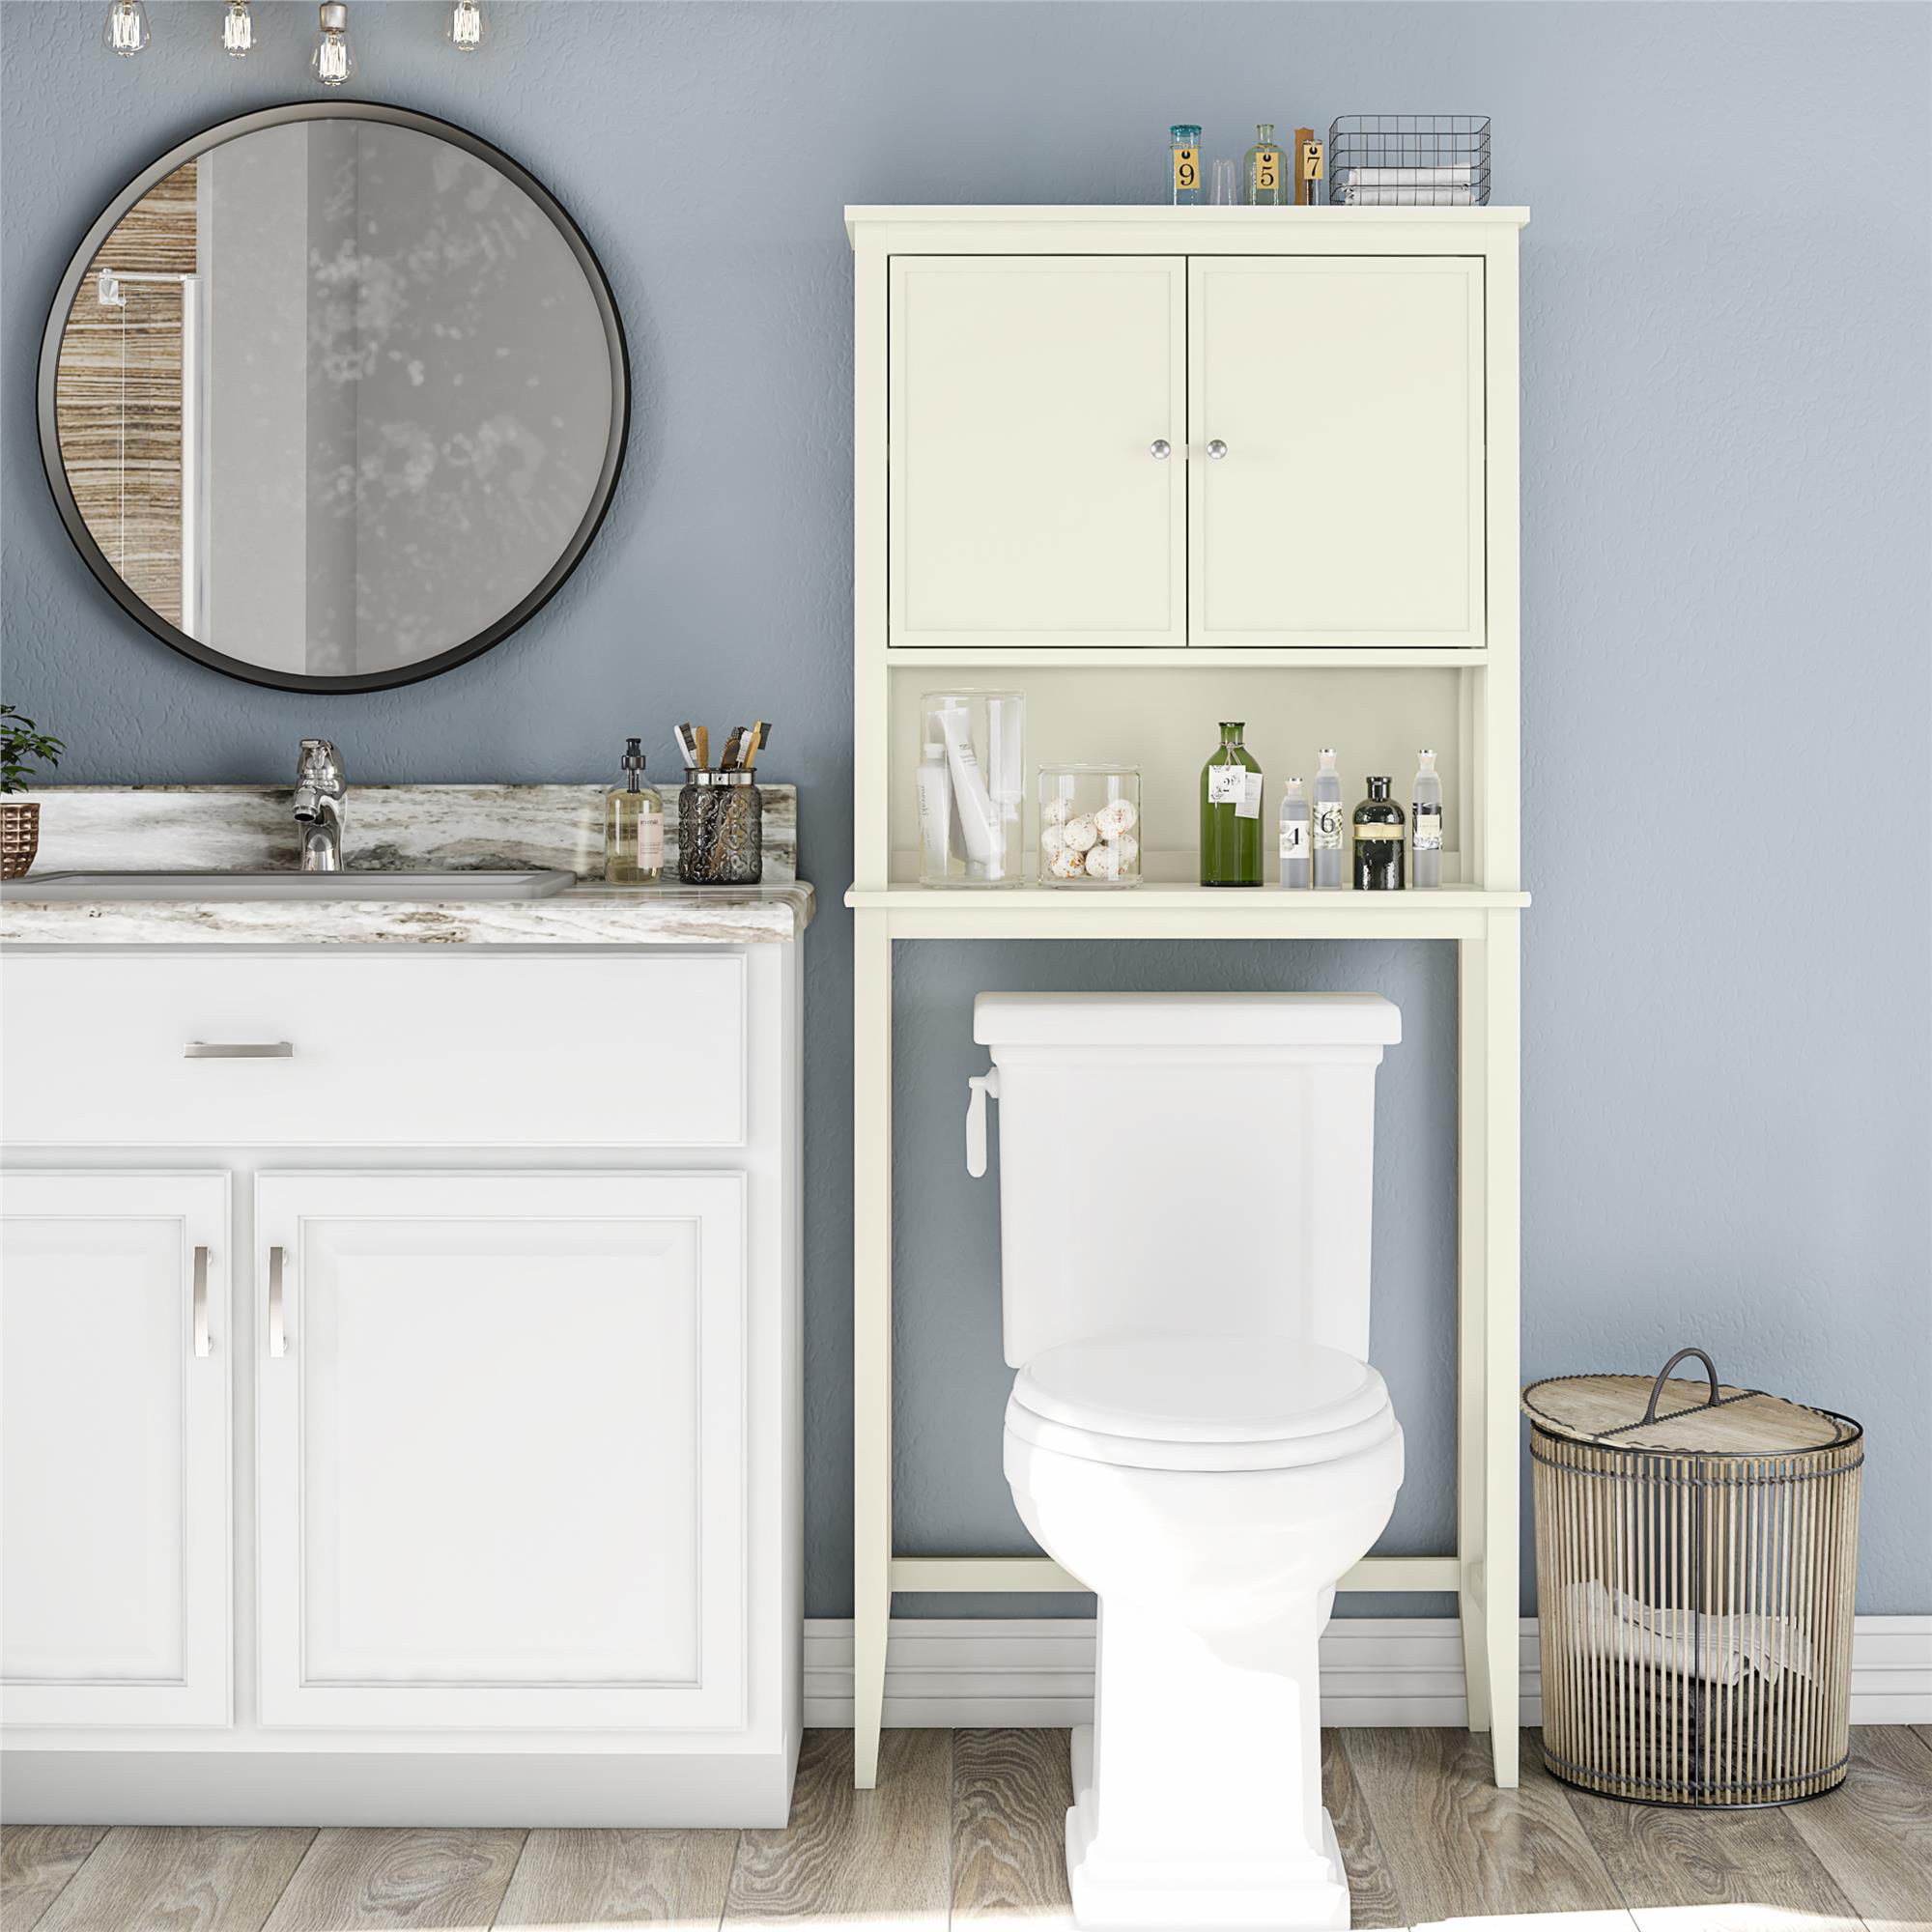 over the toilet shelf walmart Cabinets systembuild